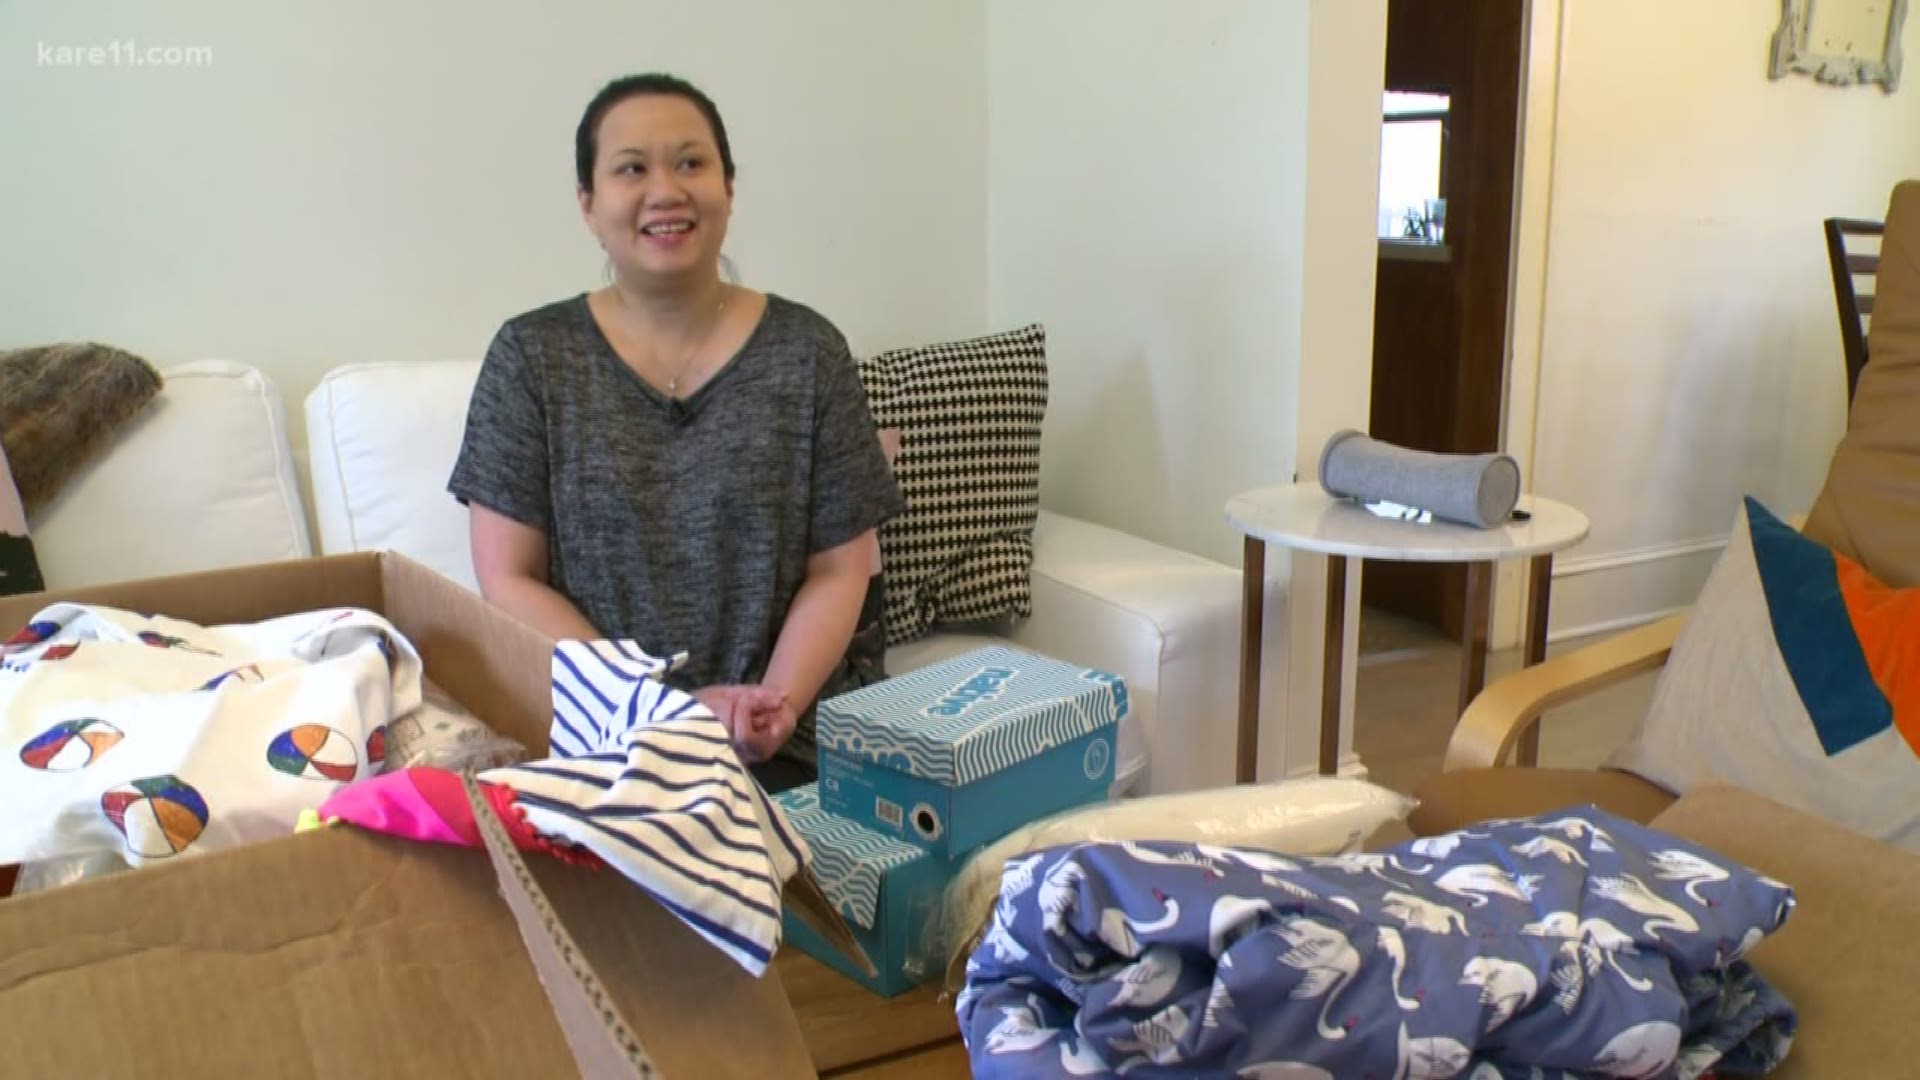 Kidizen, a Minneapolis-based company, runs an online marketplace for buying and selling used kids' clothes. But not every parent has the time to sell.